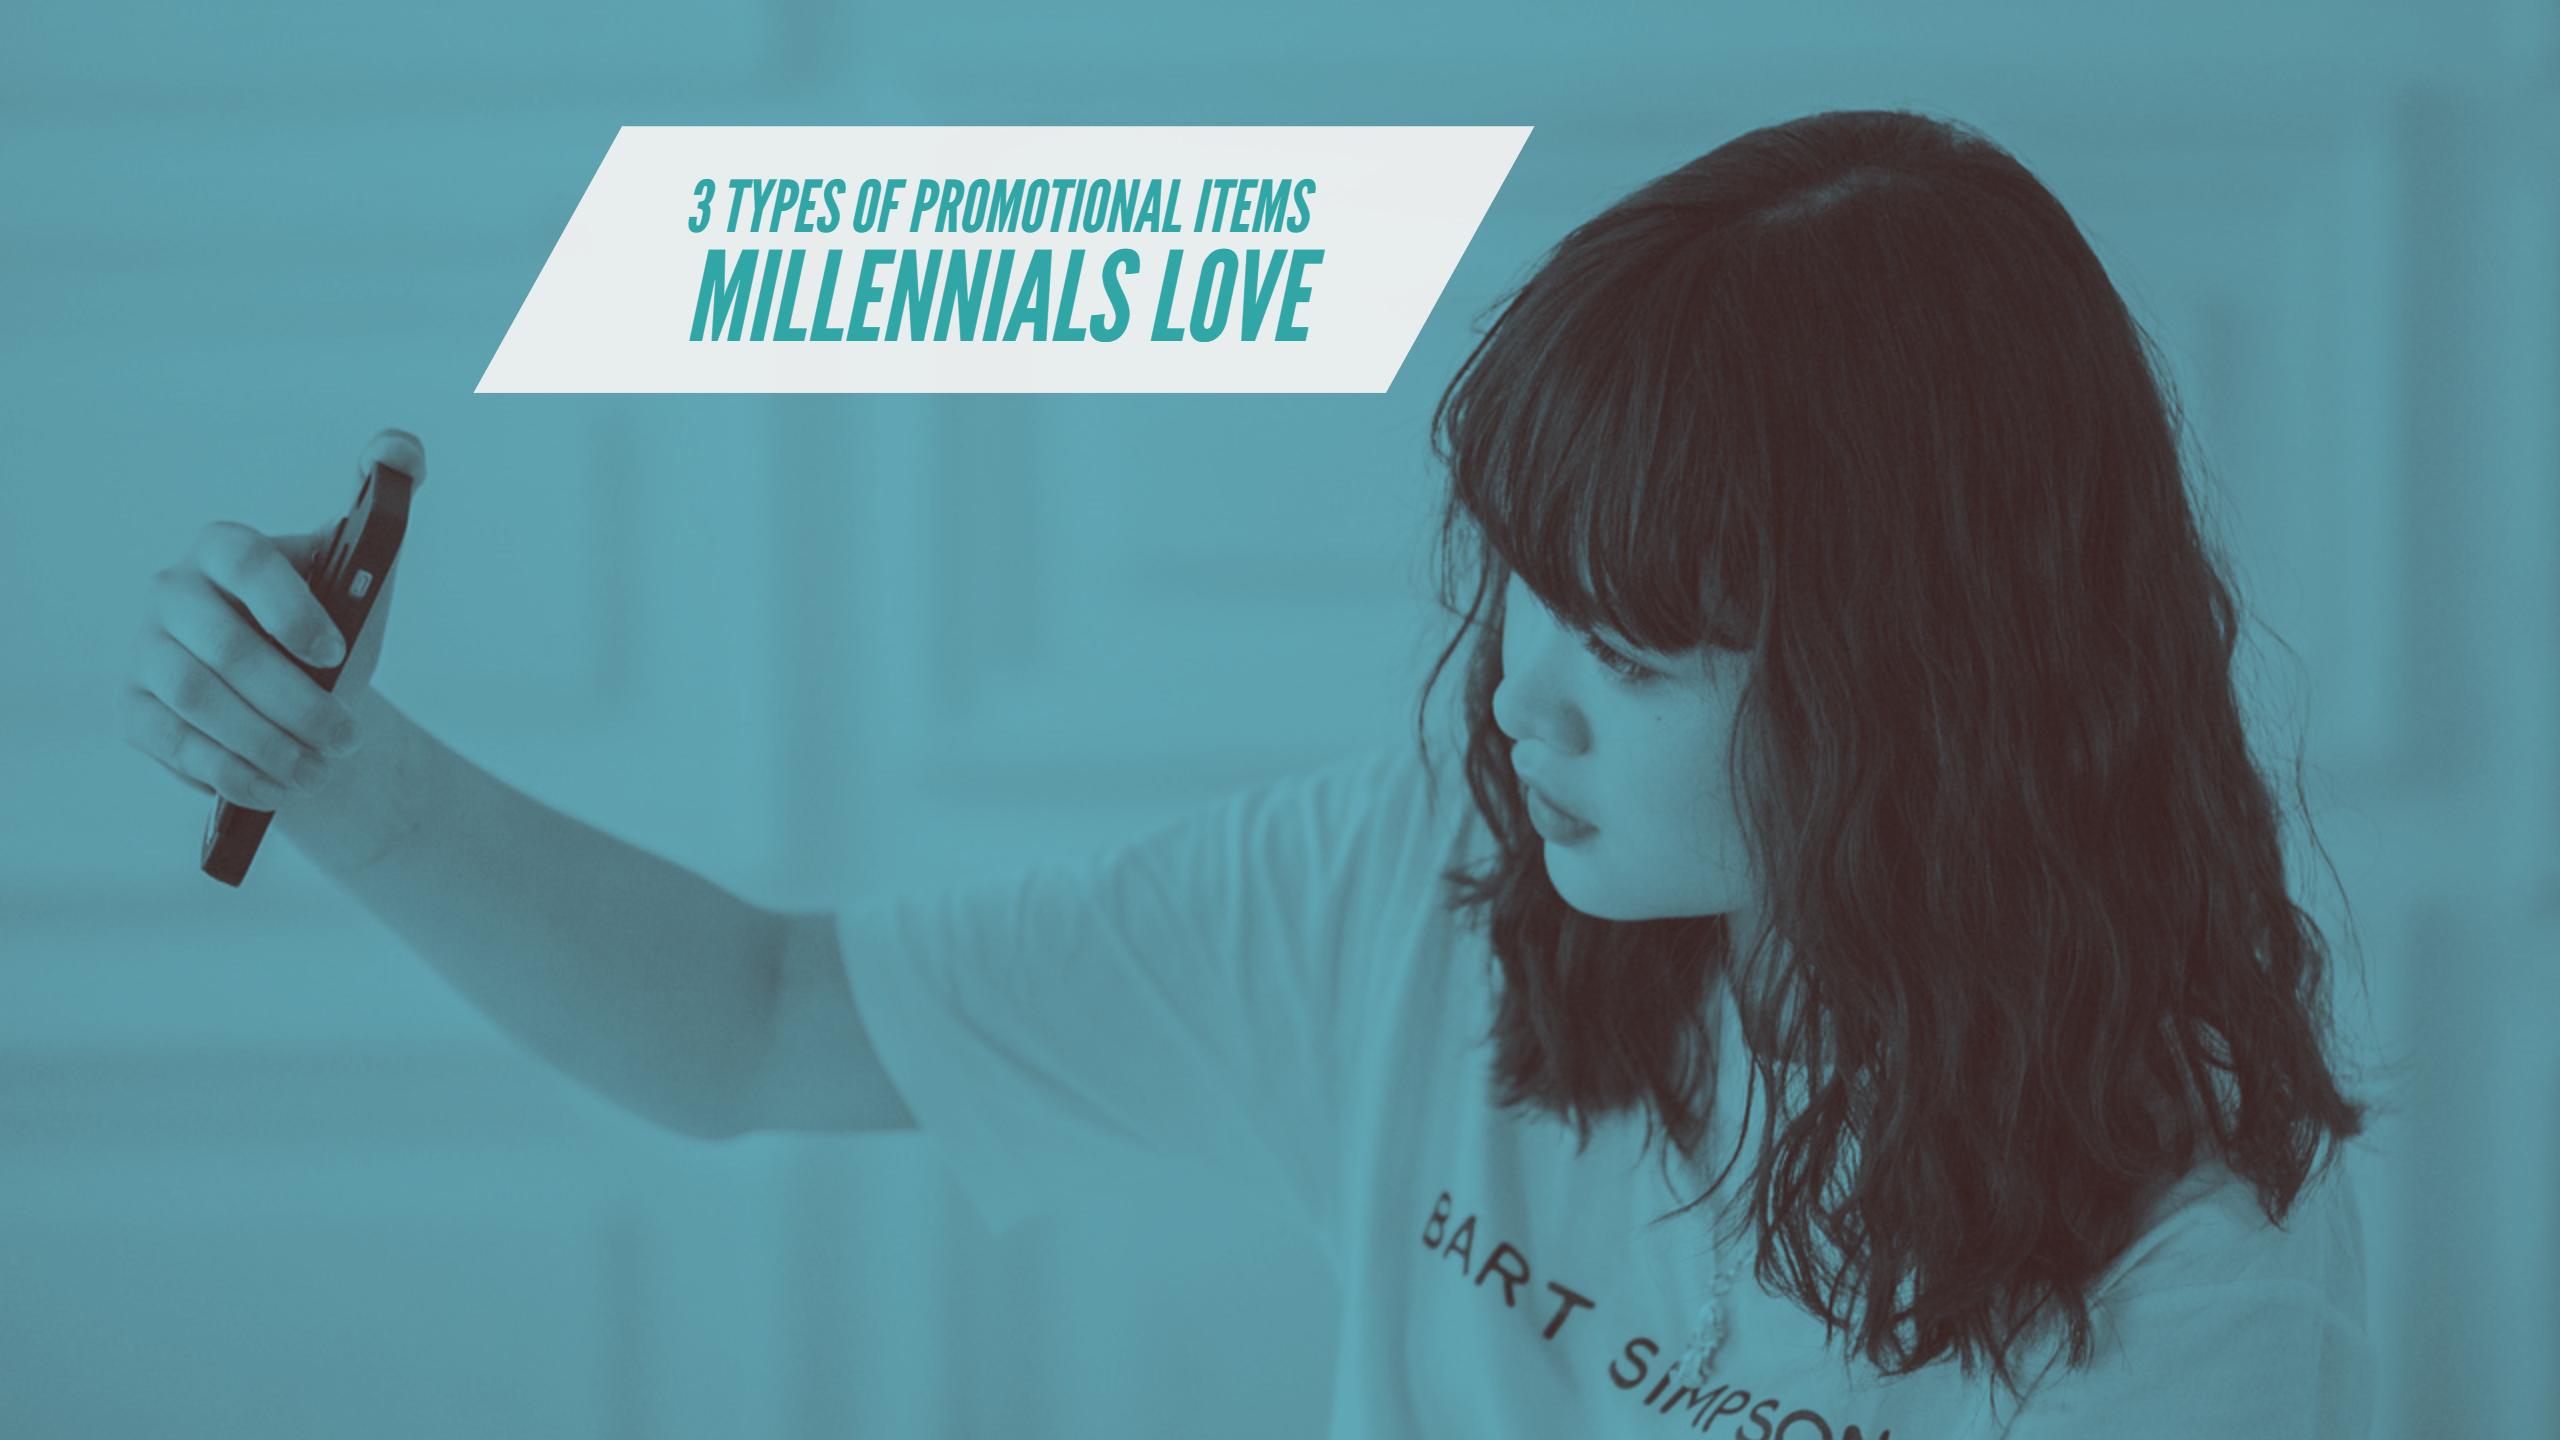 What promotional products do millennials like?